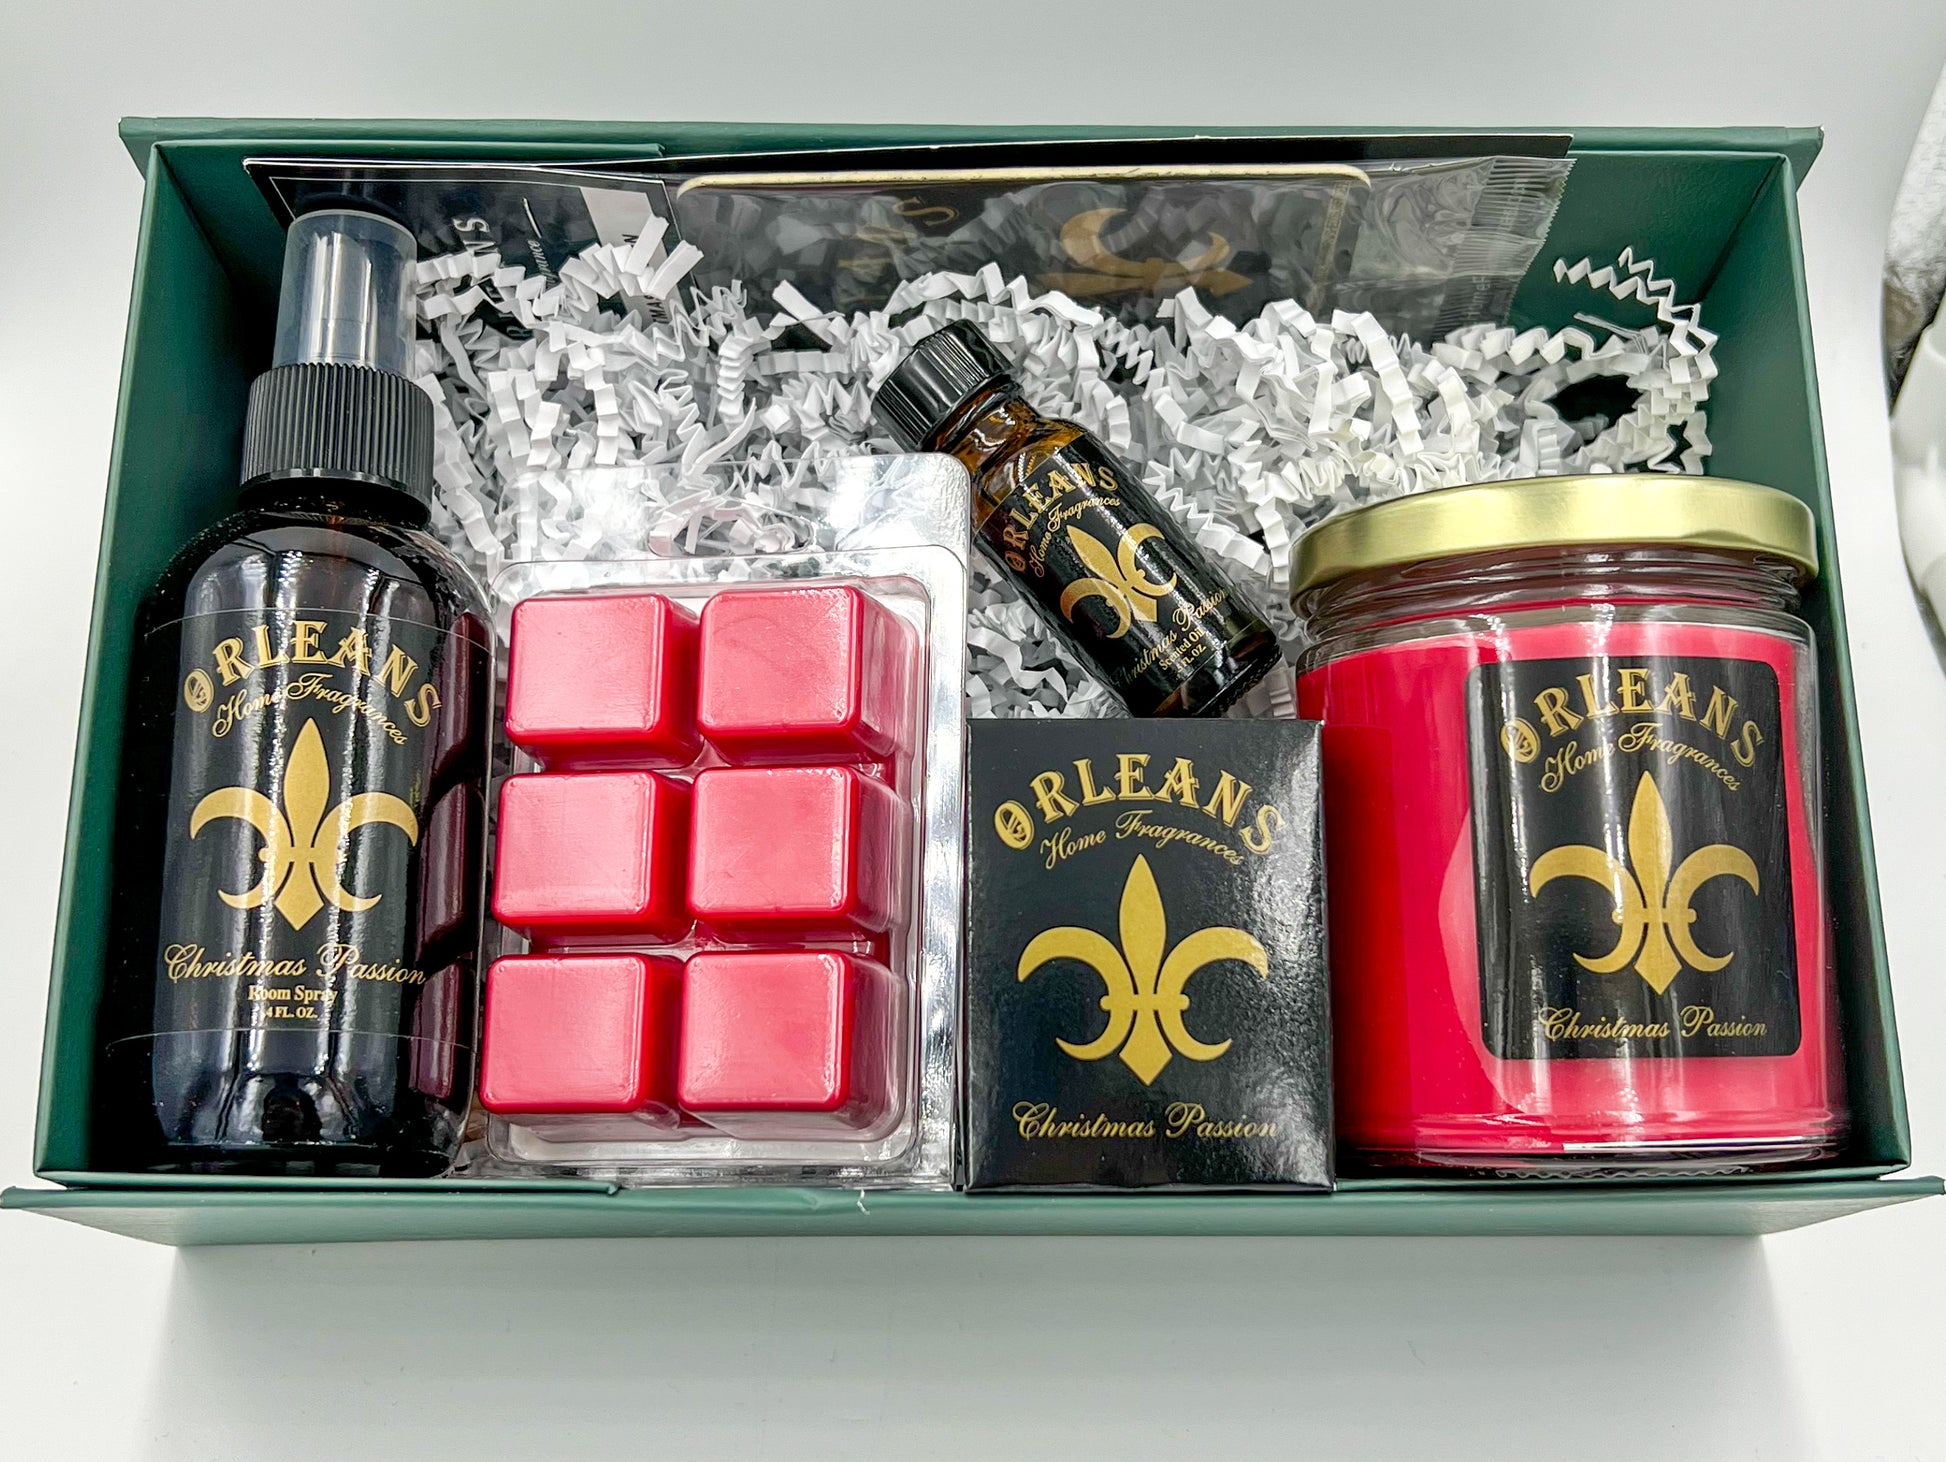 Christmas Passion Gift Set Included scented oil, 9 oz candle, votive candle, auto fragrance, 4 oz room spray, and wax melt. box included